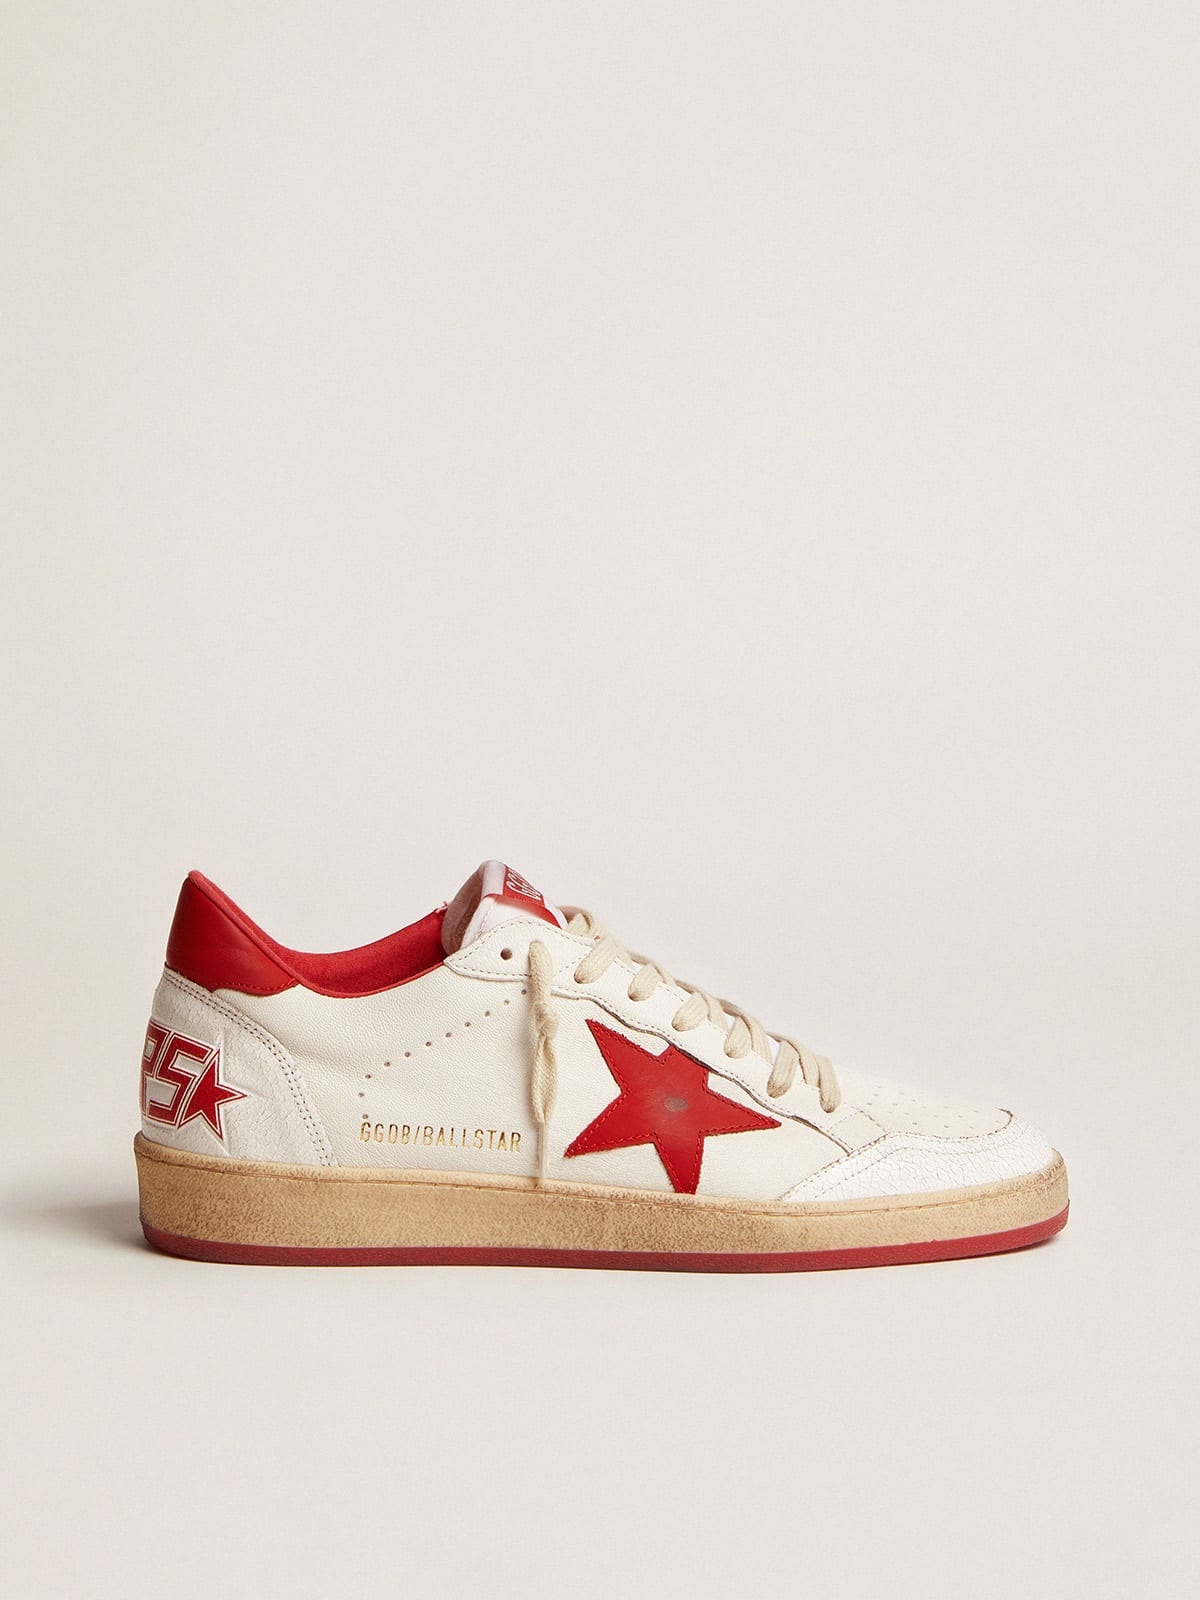 Golden Goose White Ball Star sneakers in leather with red star and heel tab  | goldengoose | REVERSIBLE